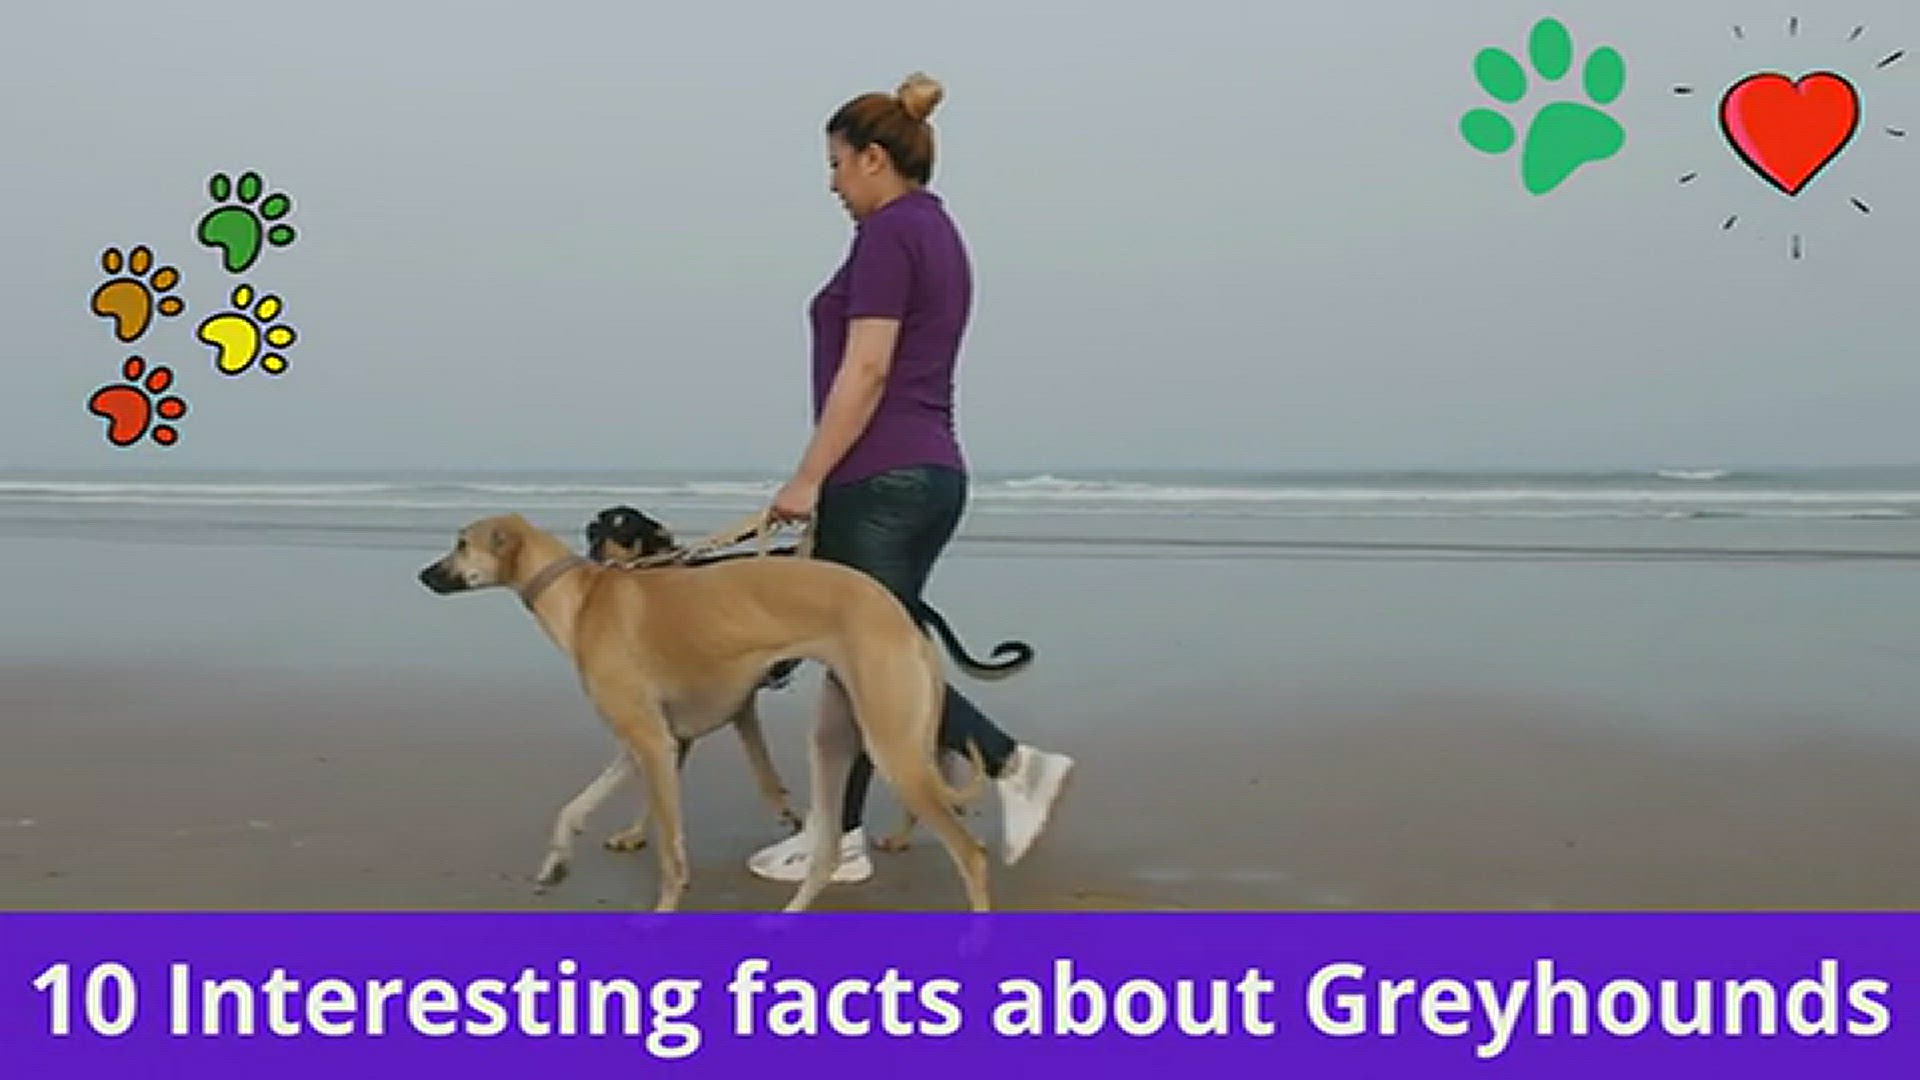 'Video thumbnail for 10 interesting facts about Greyhounds'